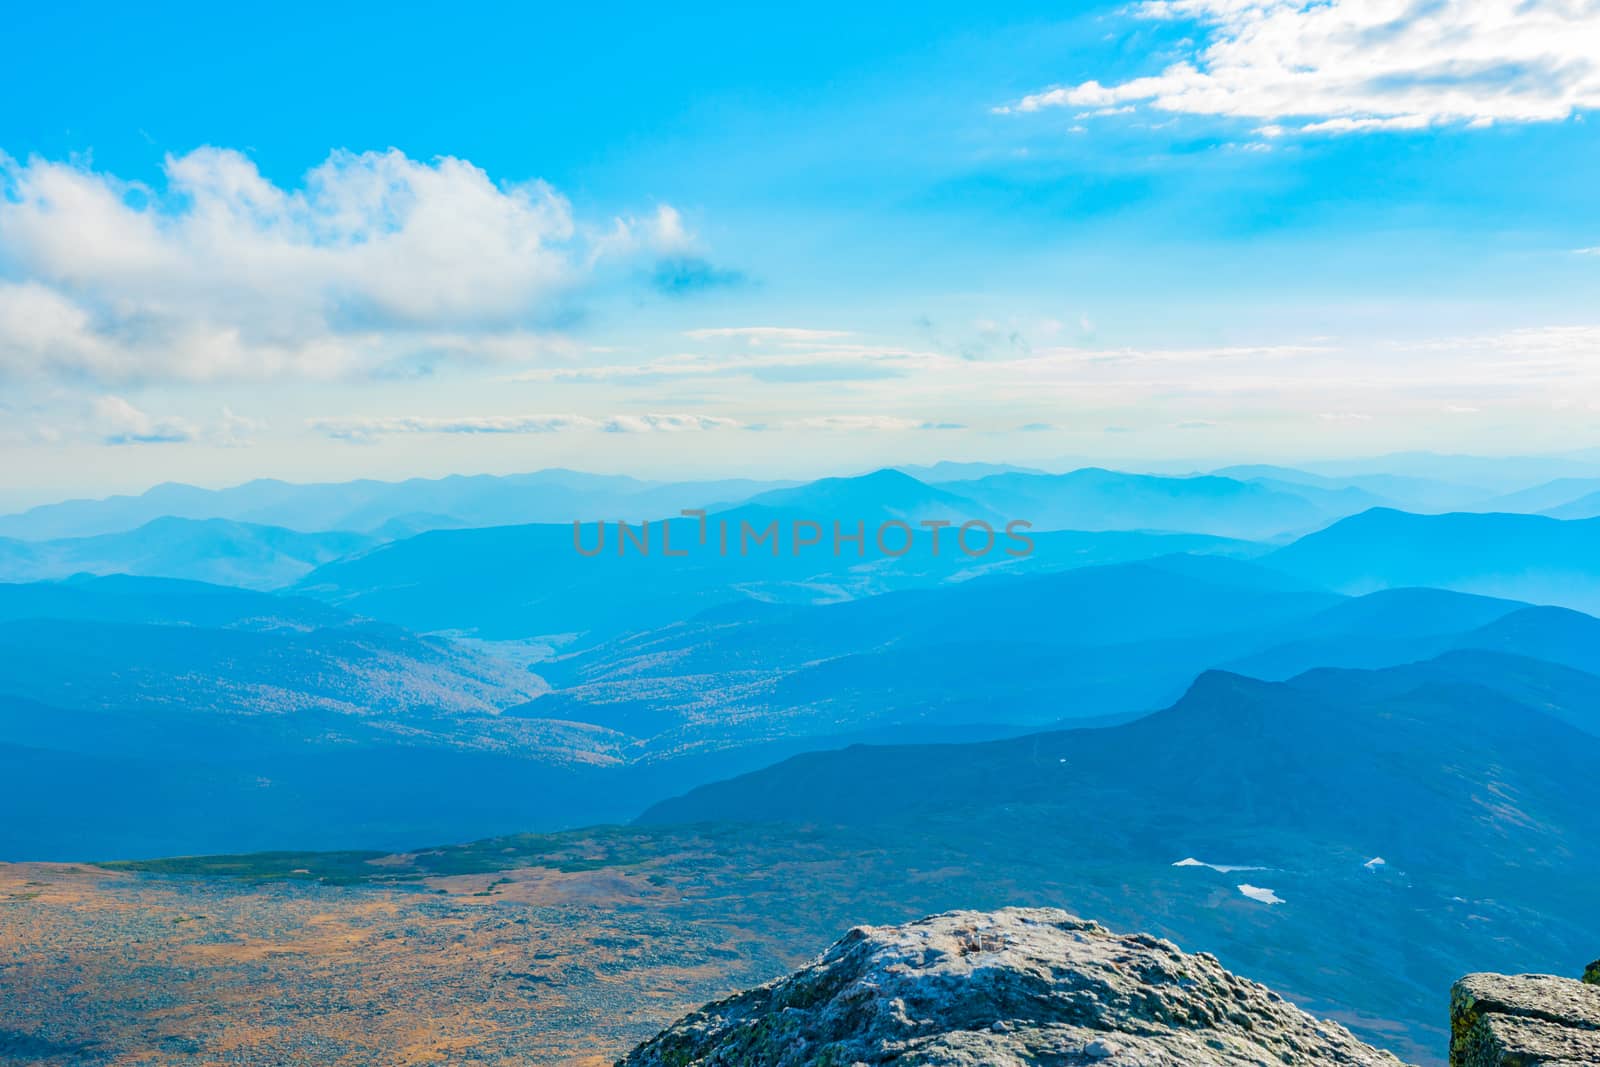 View from top of Mount Washington across mountainous landscape in New Hampshire USA.